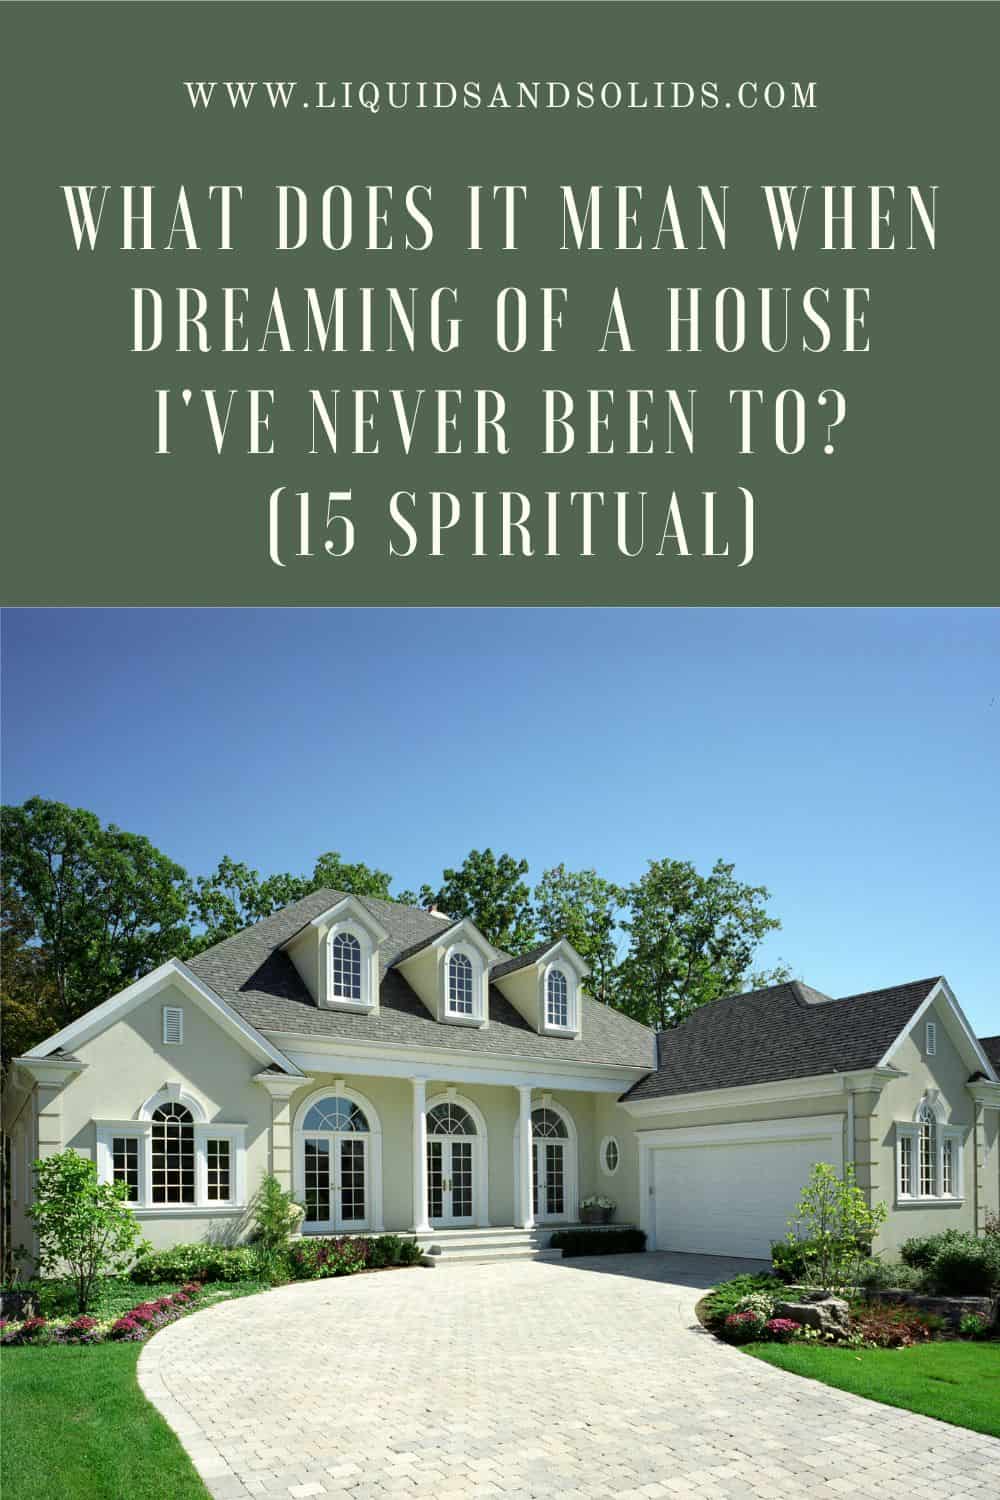 What does dreaming of an unfamiliar house mean?